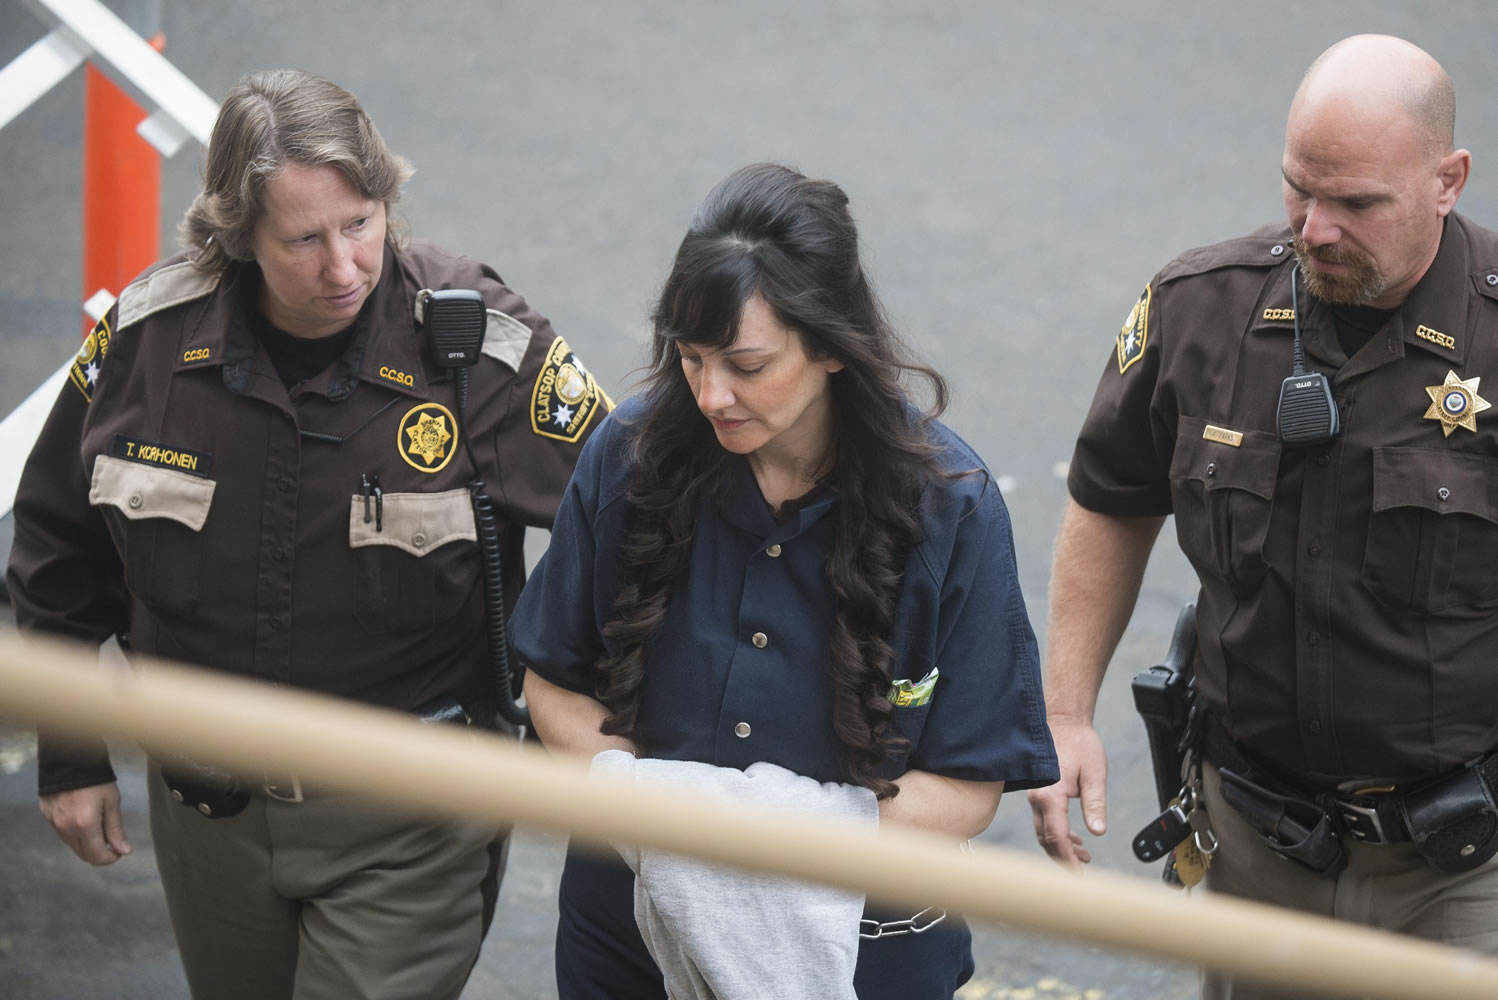 Jessica Smith, center, is led into the Clatsop County County Courthouse for a status hearing, Friday, in Astoria, Ore. Smith is charged with aggravated murder and attempted aggravated murder in the drowning death of her 2-year-old daughter and cutting the throat of her teenage daughter in Cannon Beach, Ore.